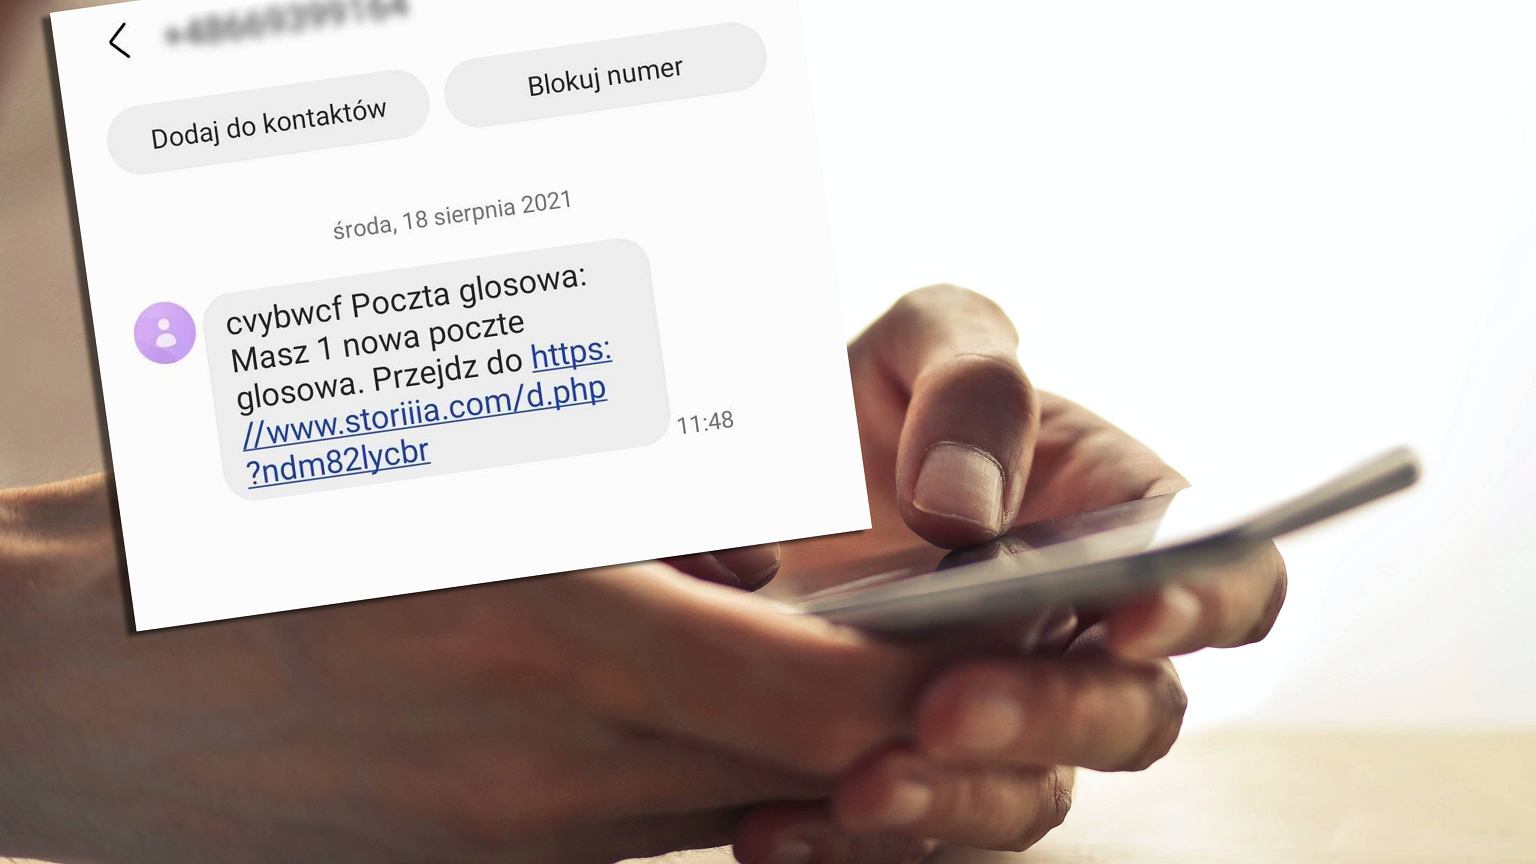 SMS containing a voicemail message is a scam.  Police warn against activating links